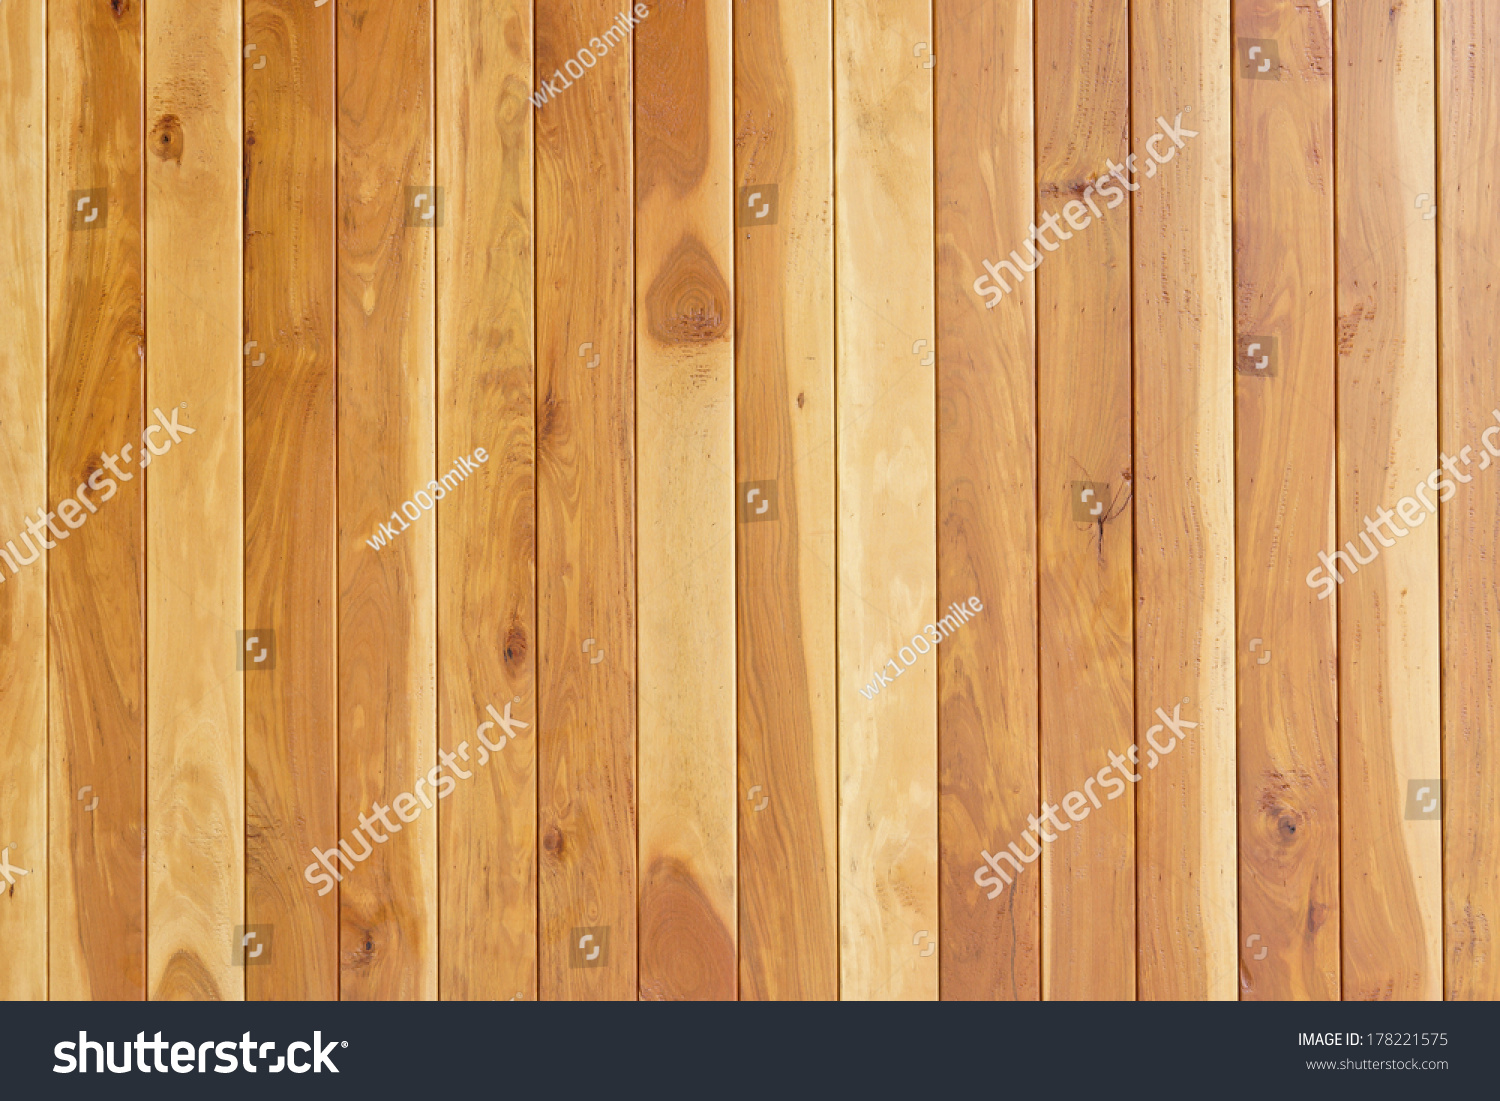 teak wood plank texture with natural patterns / teal plank / teak wall #178221575